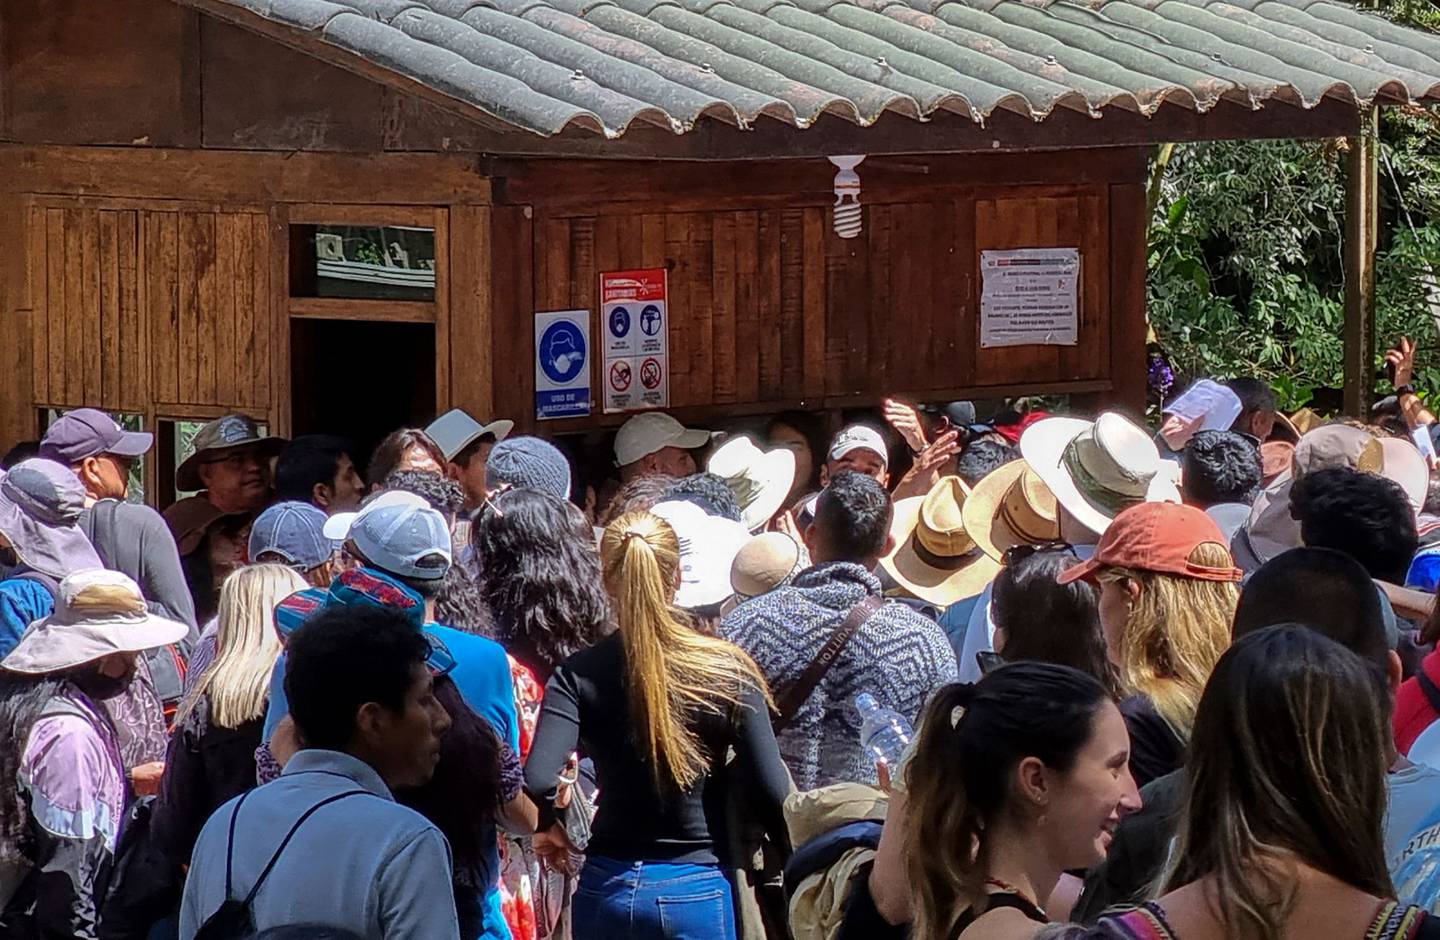 Overcrowding and overbooking by tour operators is causing chaos at Peru's most popular tourist ste. AFP